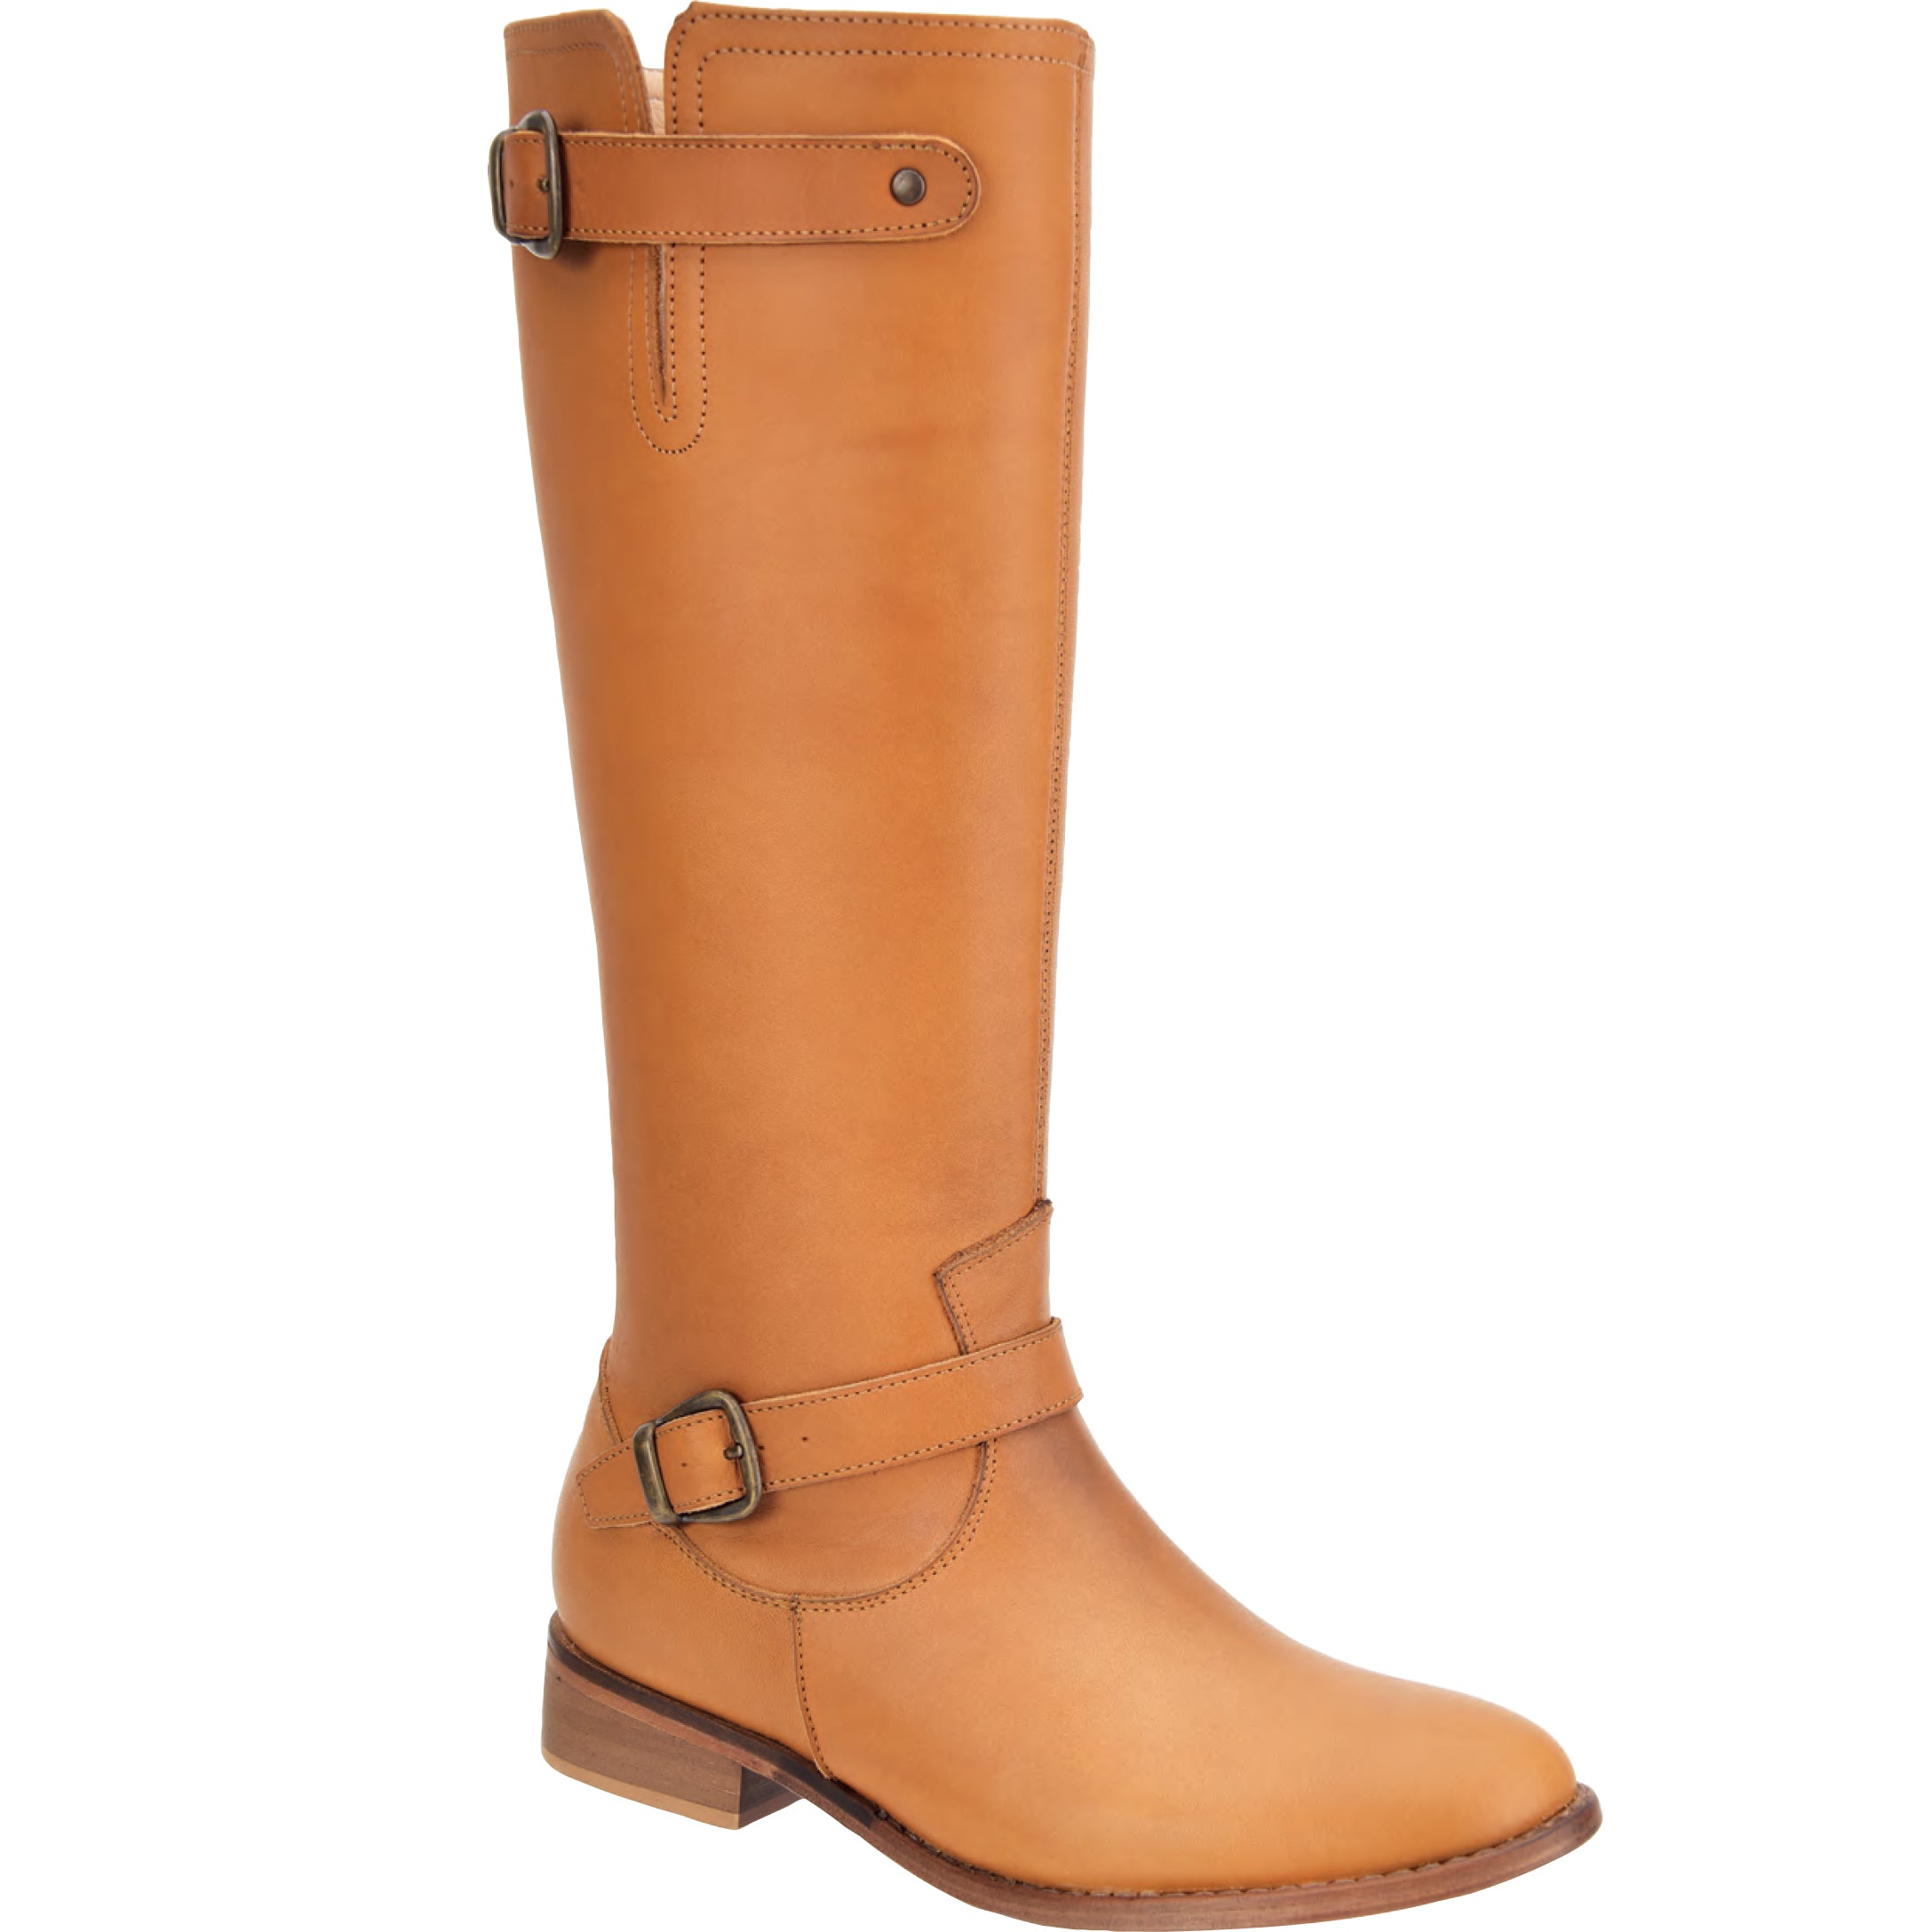 Honey Riding Boots For Women